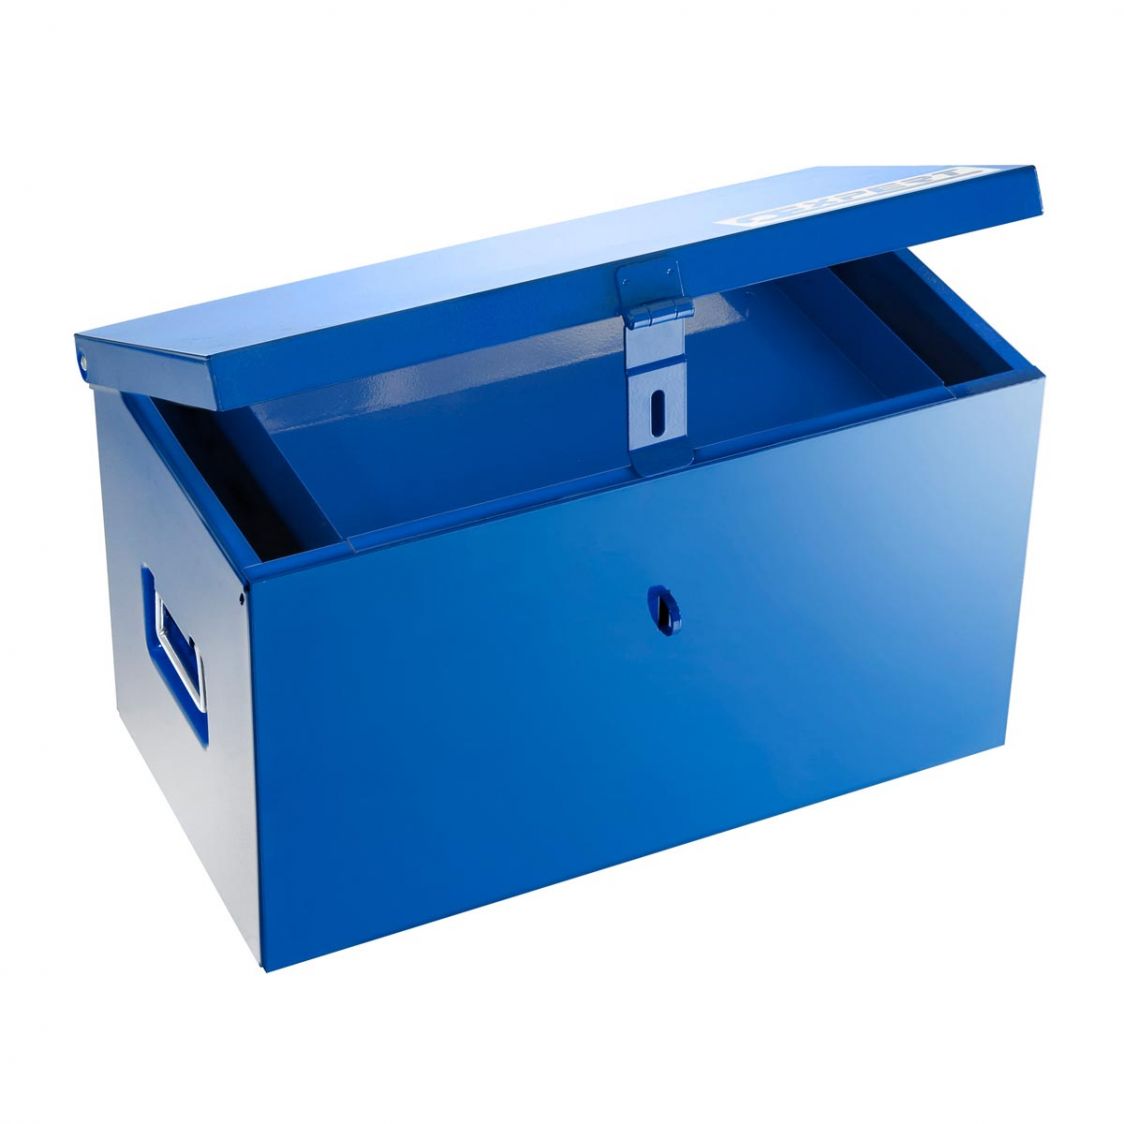 EXPERT by FACOM E010202 - 650mm Worksite Tool Chest